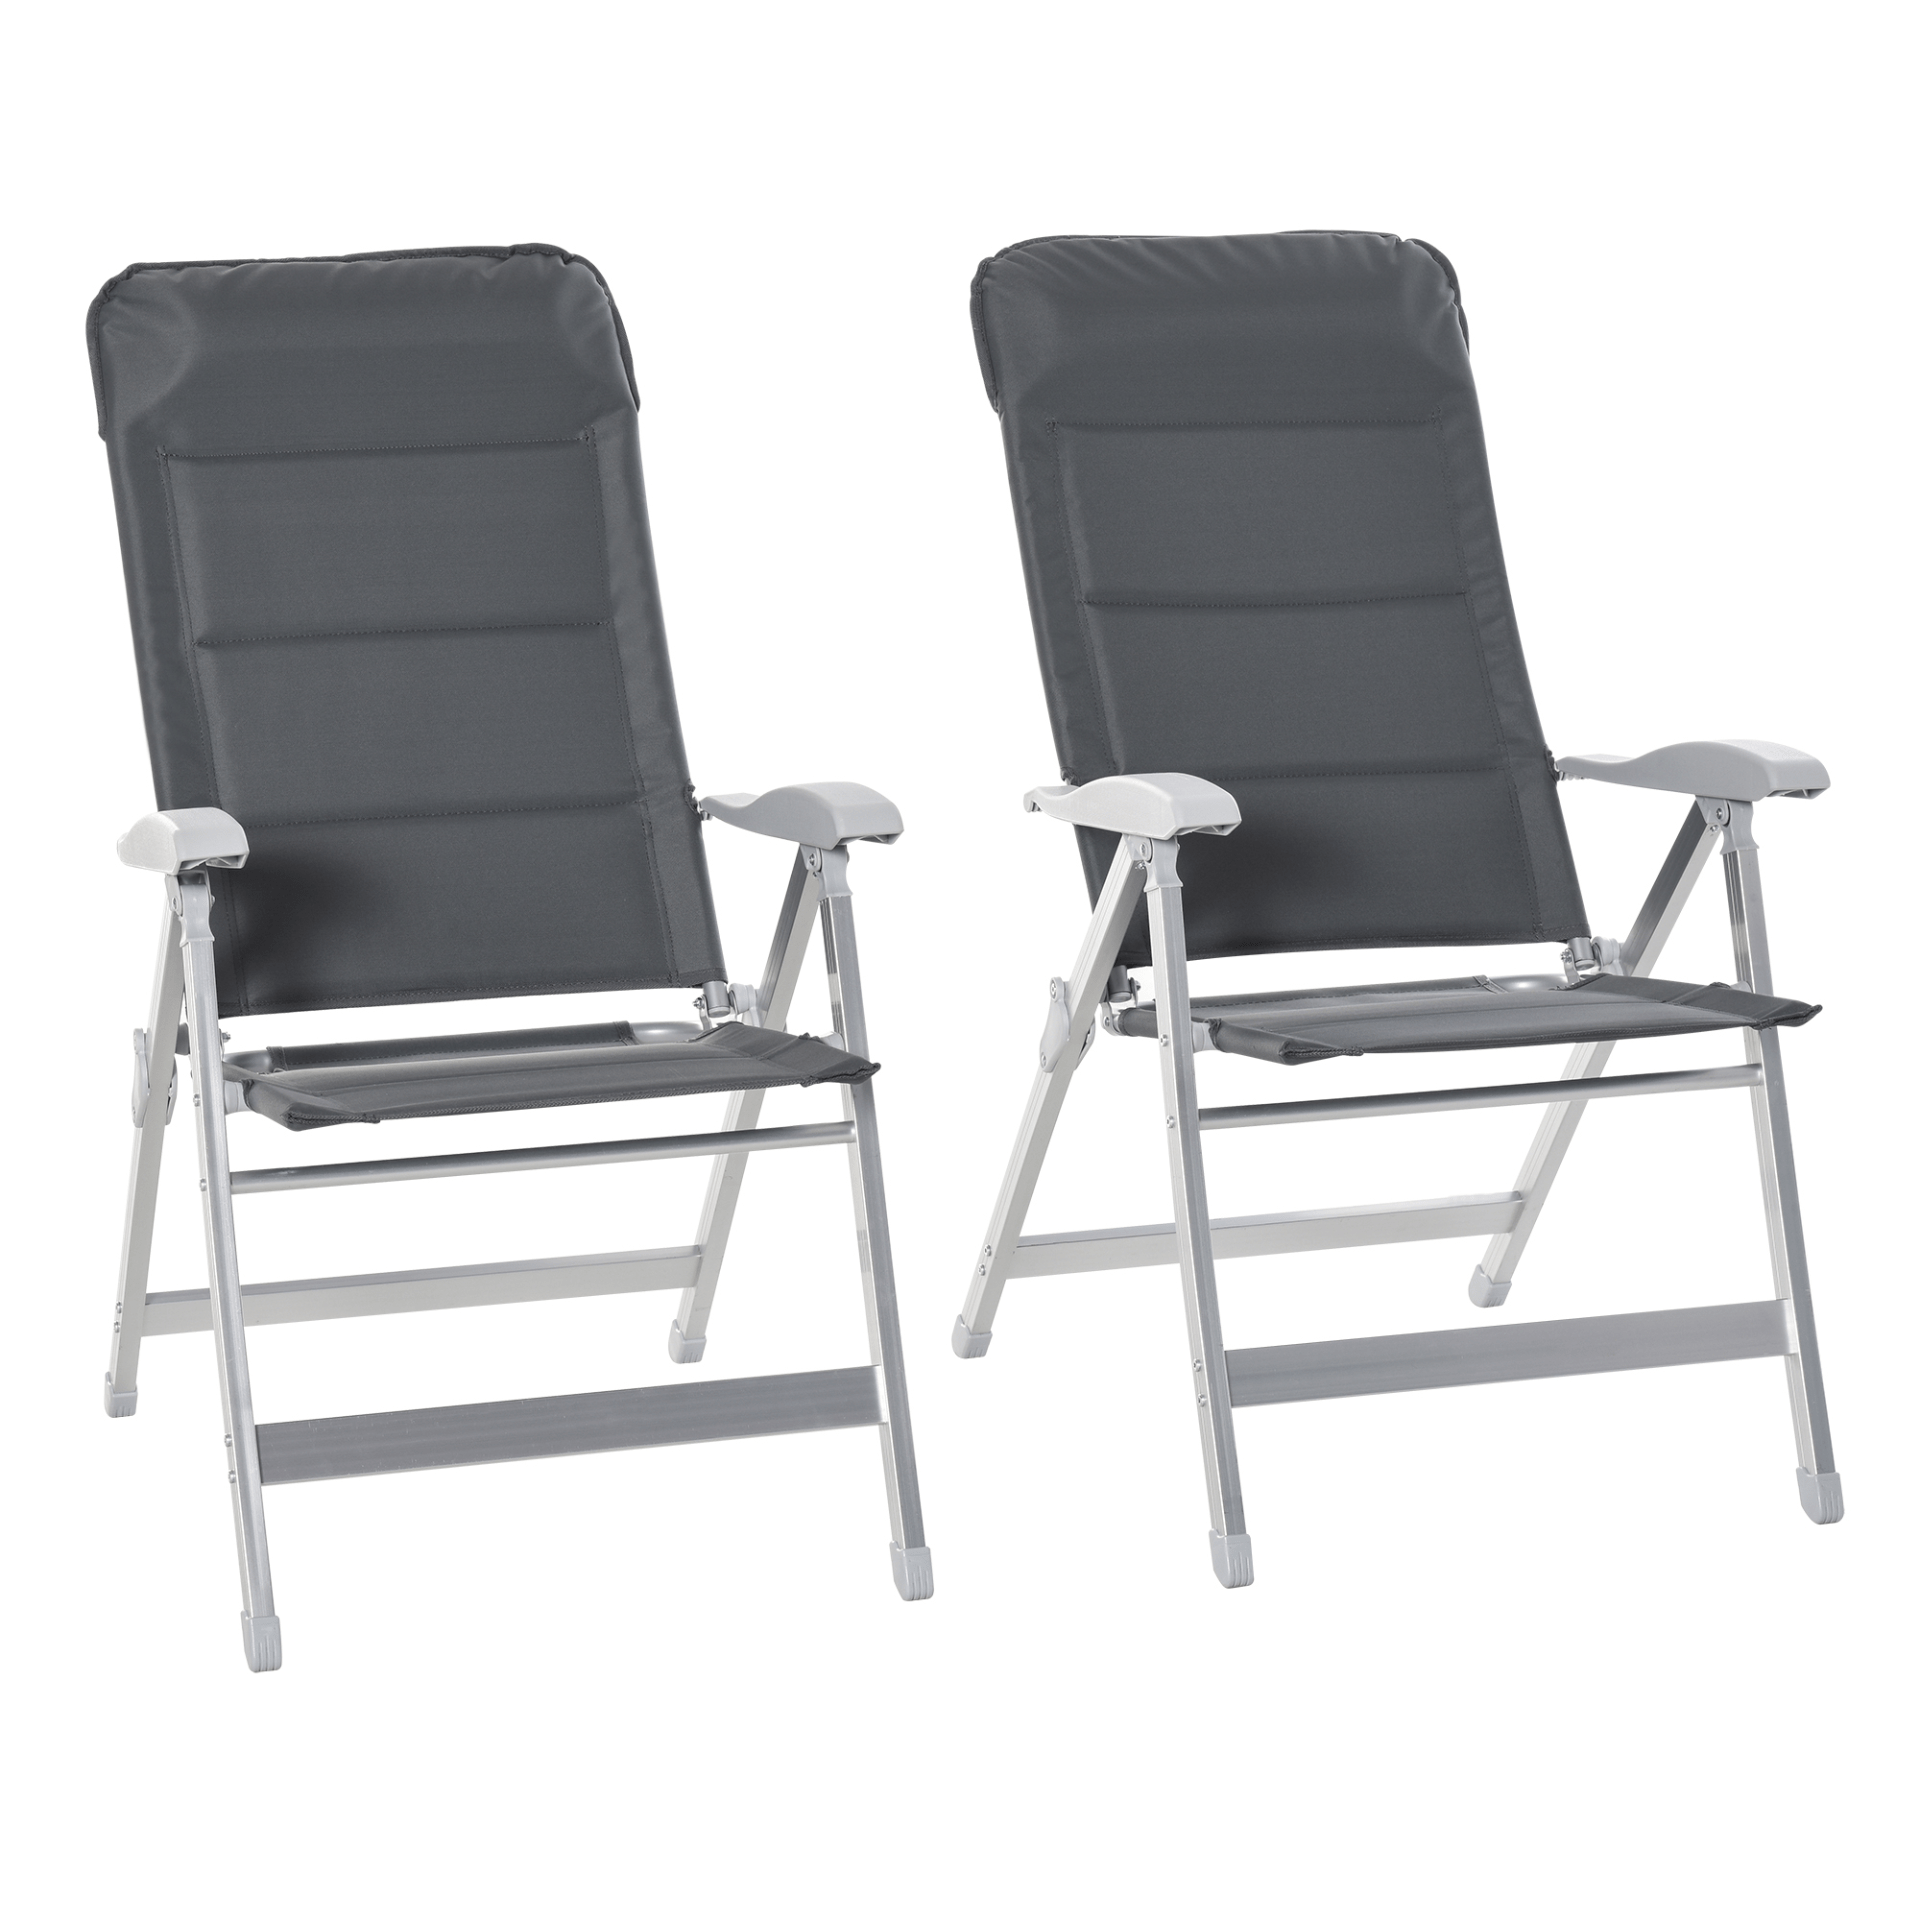 Outsunny Set Of 2 Padded Folding Deck Chair Garden Seats - Adjustable Back, Armrest, Aluminium Frame - Portable Camping Outdoor Pool Grey Camping Chair Cosy Camping Co. Grey  